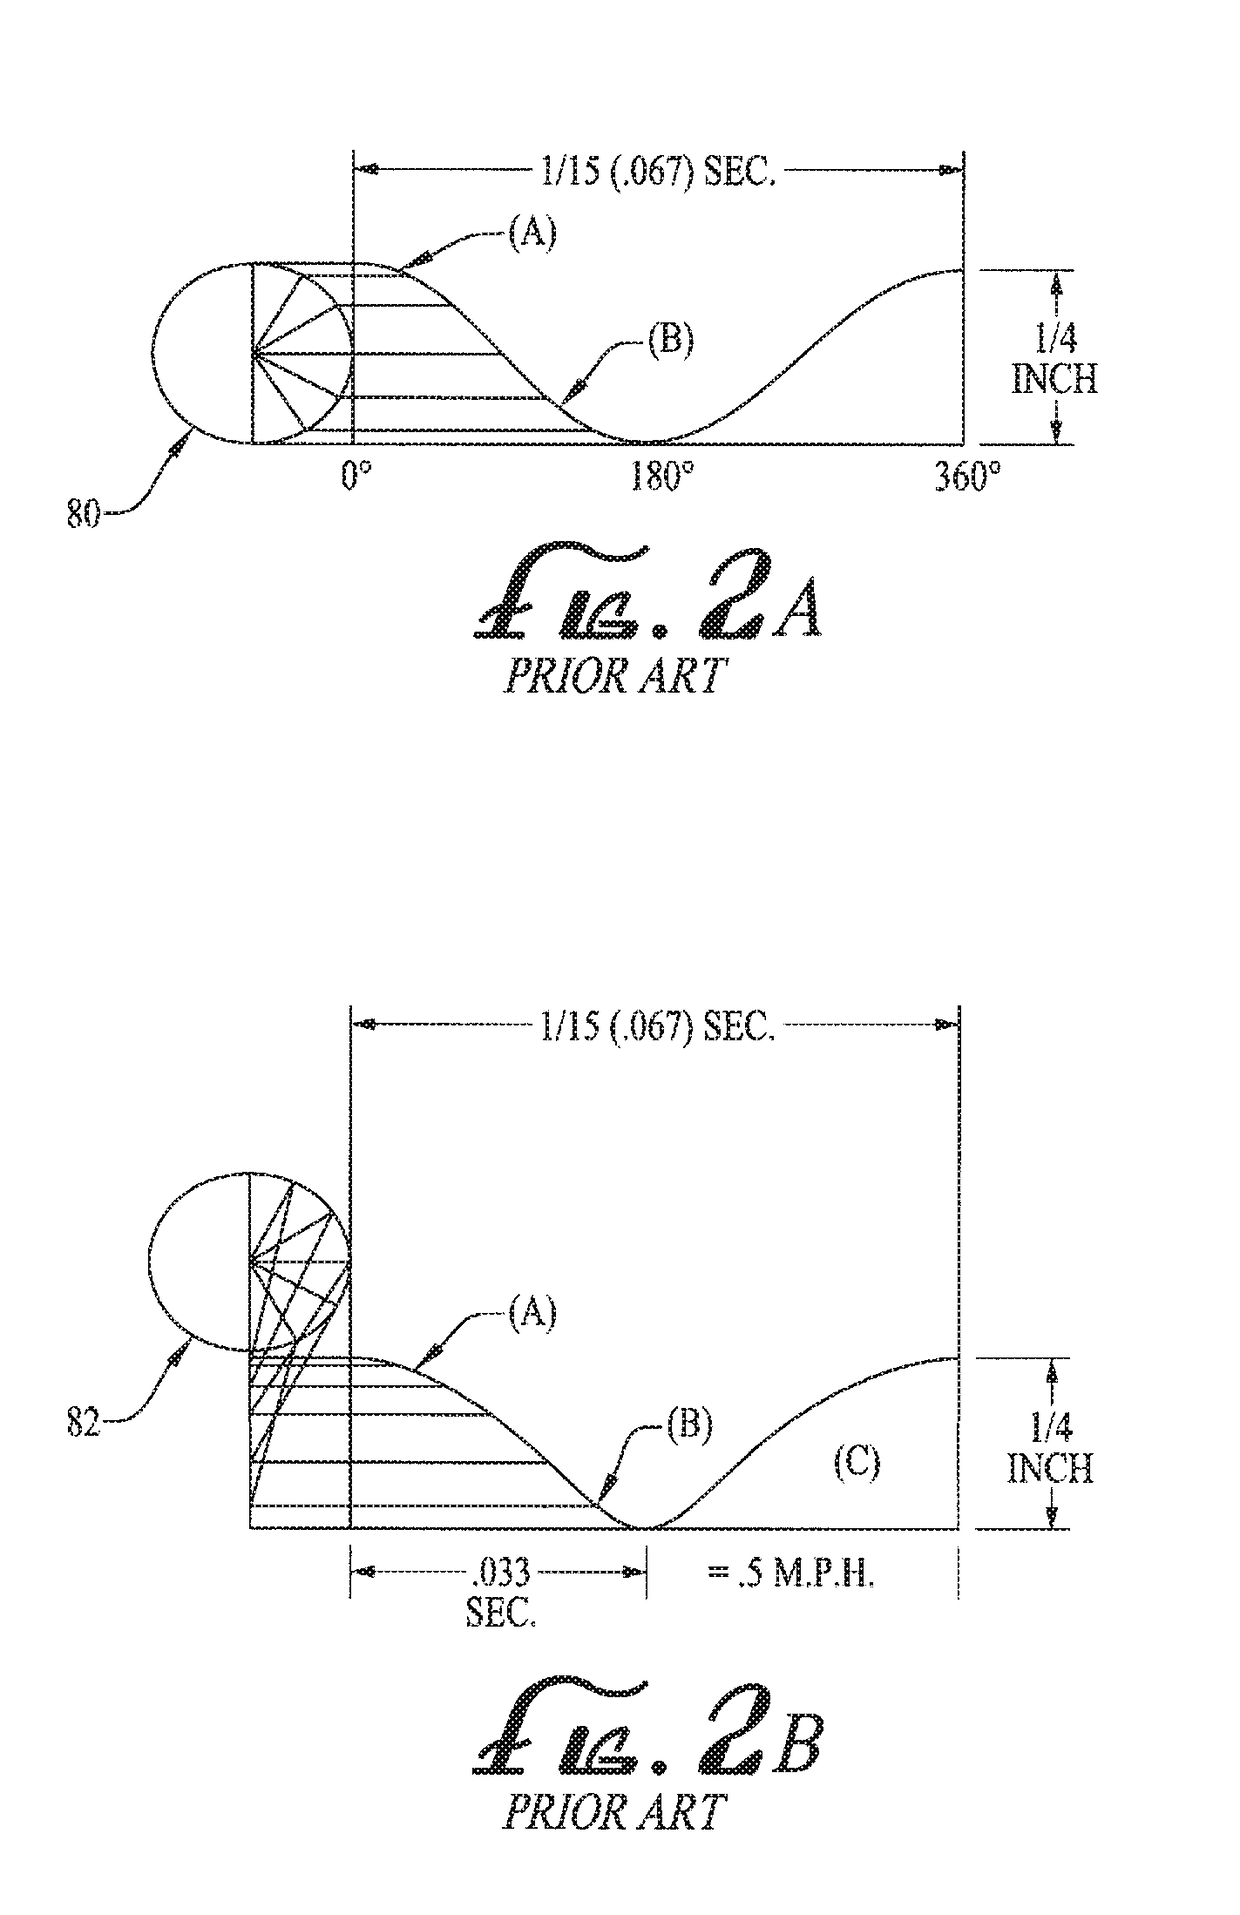 Device for delivery of resonant frequencies to treated muscles